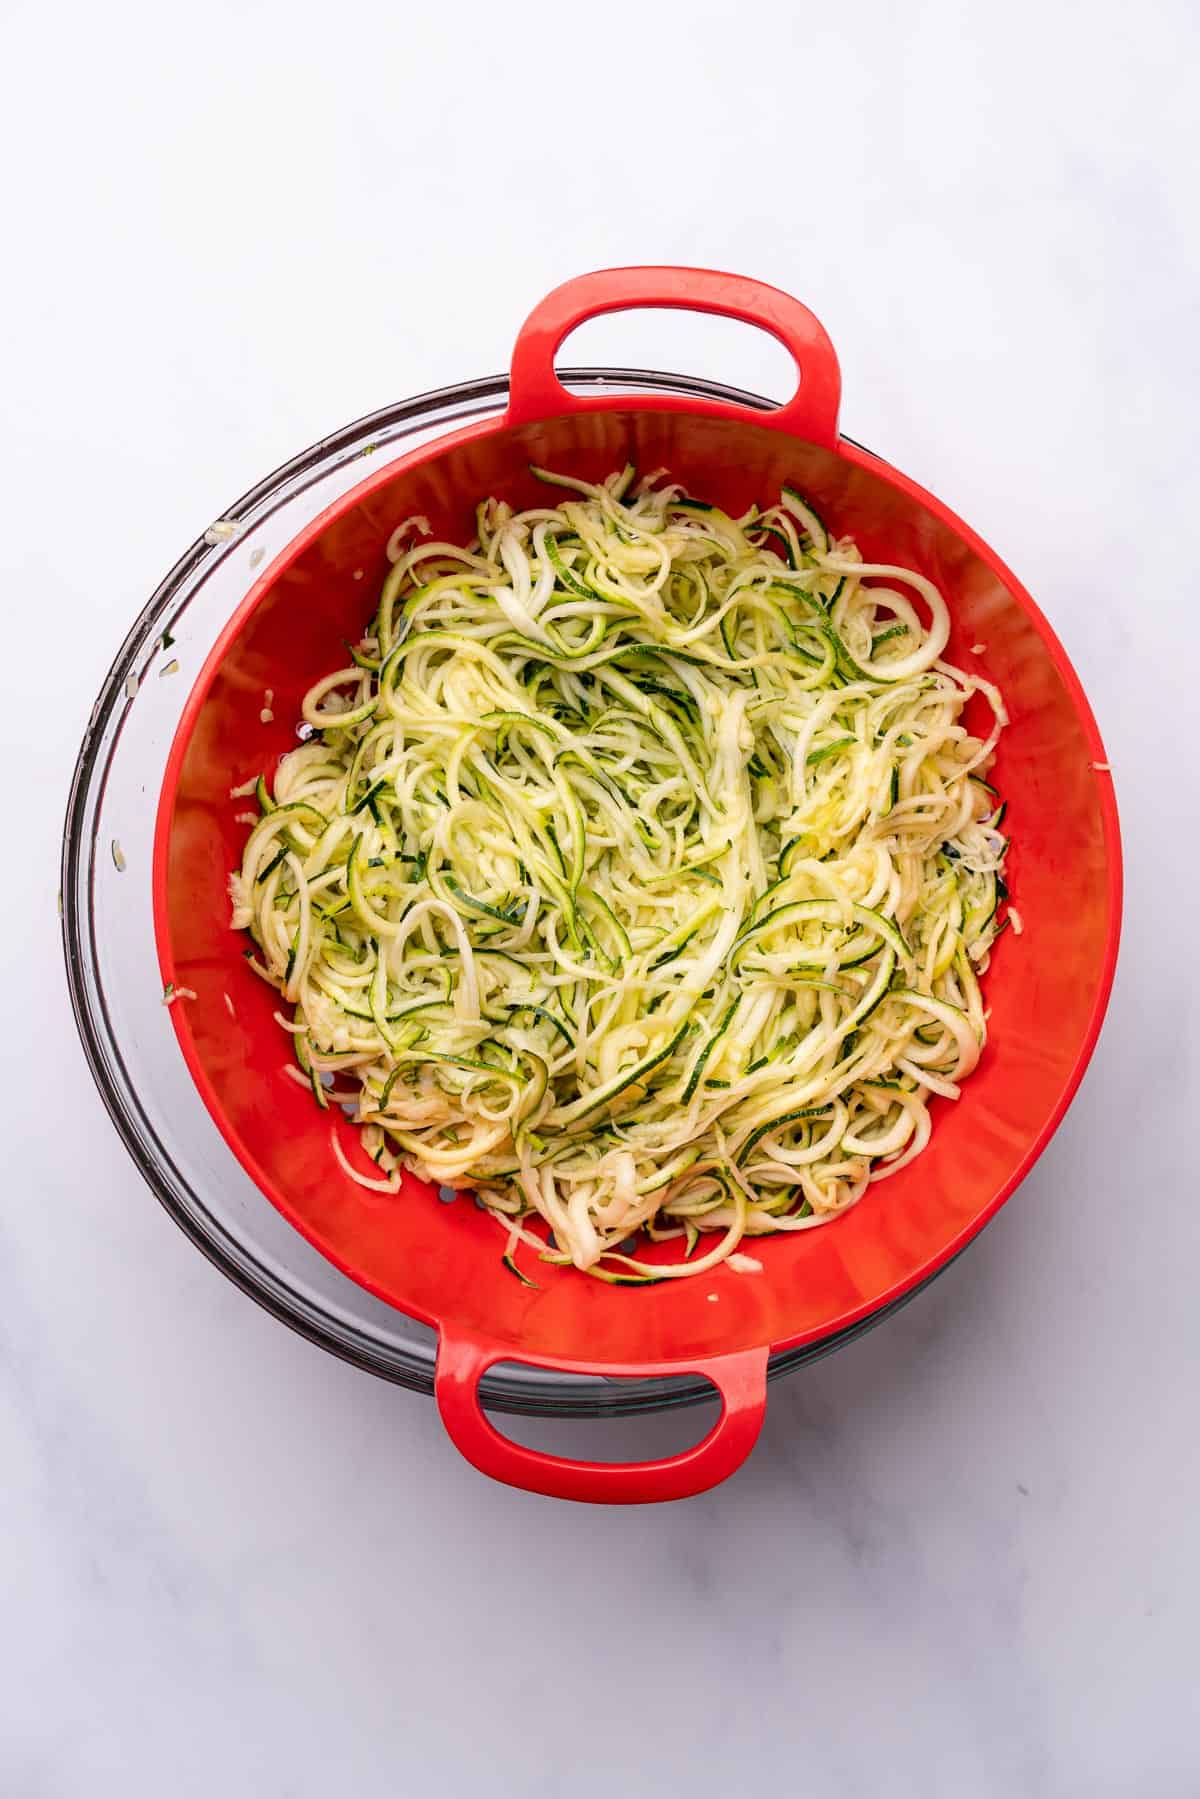 salted zucchini noodles in a red colander to drain out excess moisture 